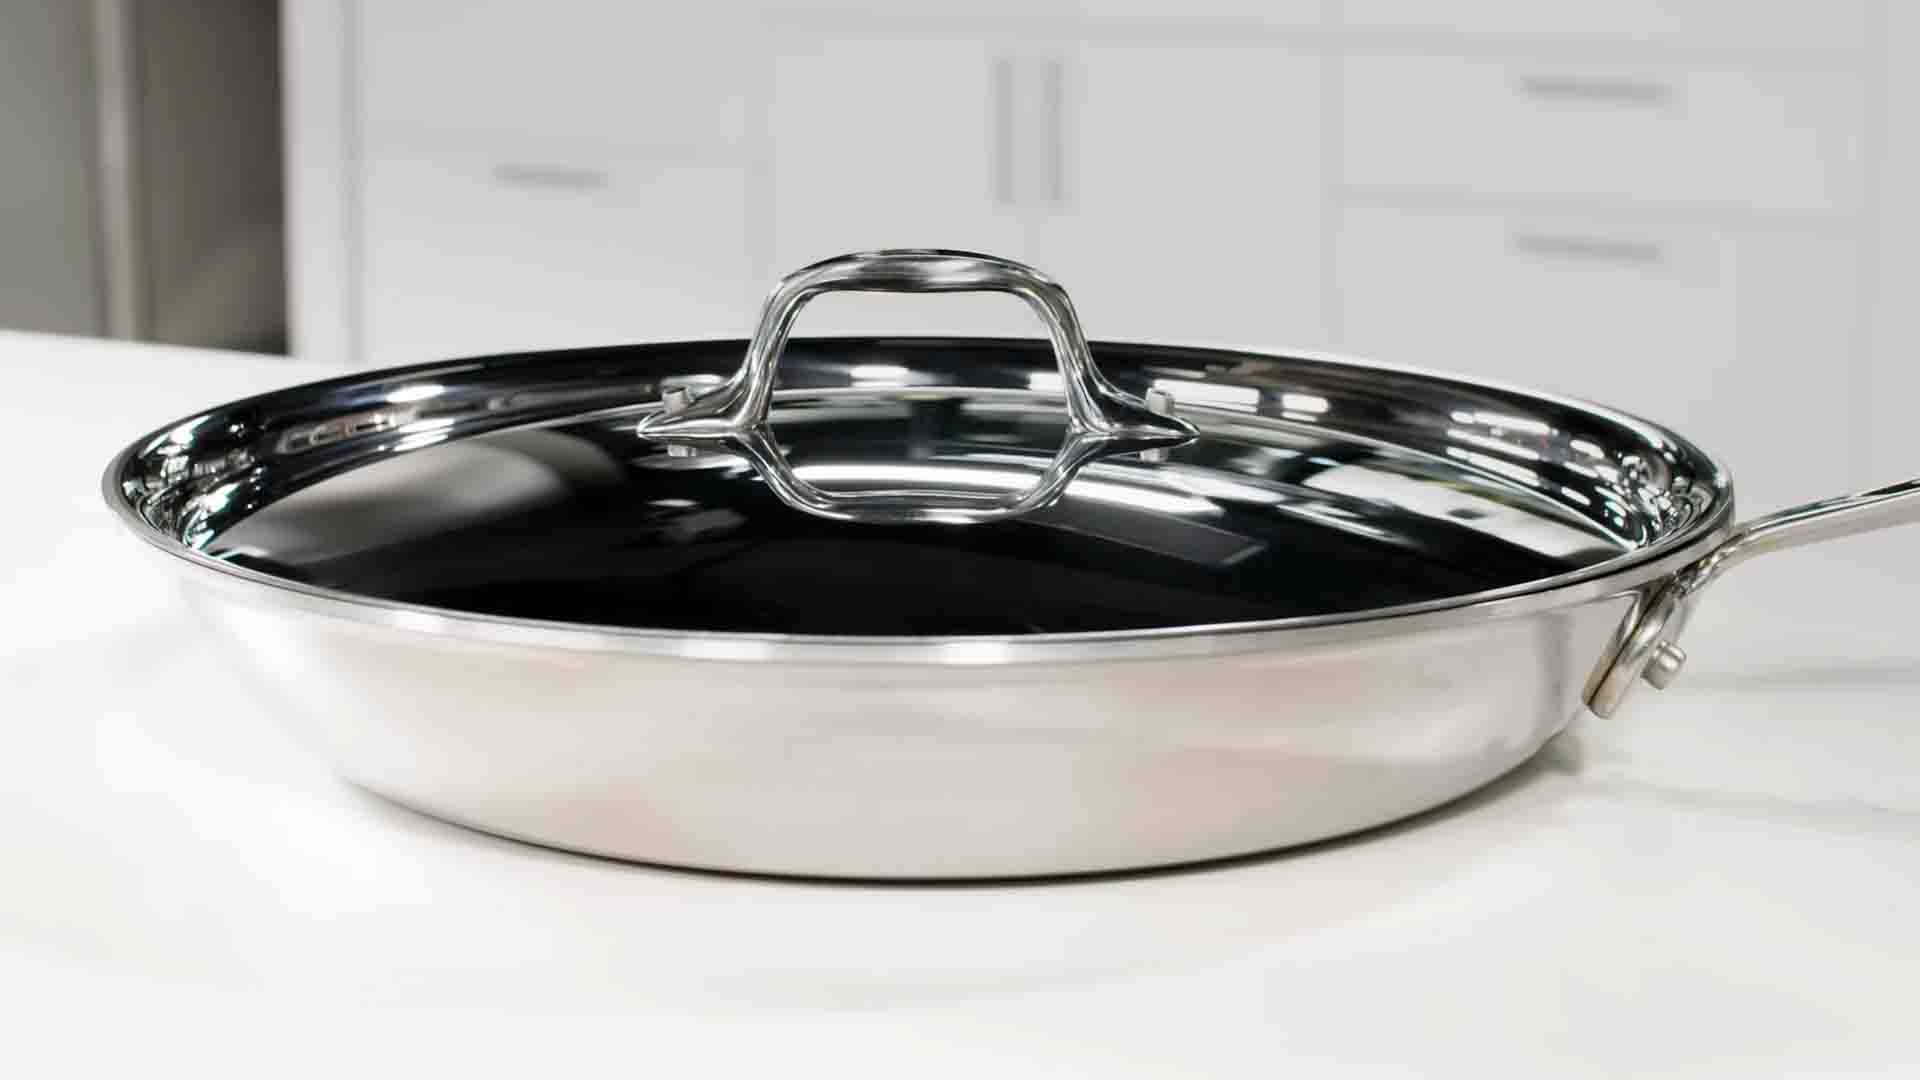 WHAT IS THE BEST POOTS AND PANS FOR GAS STOVE